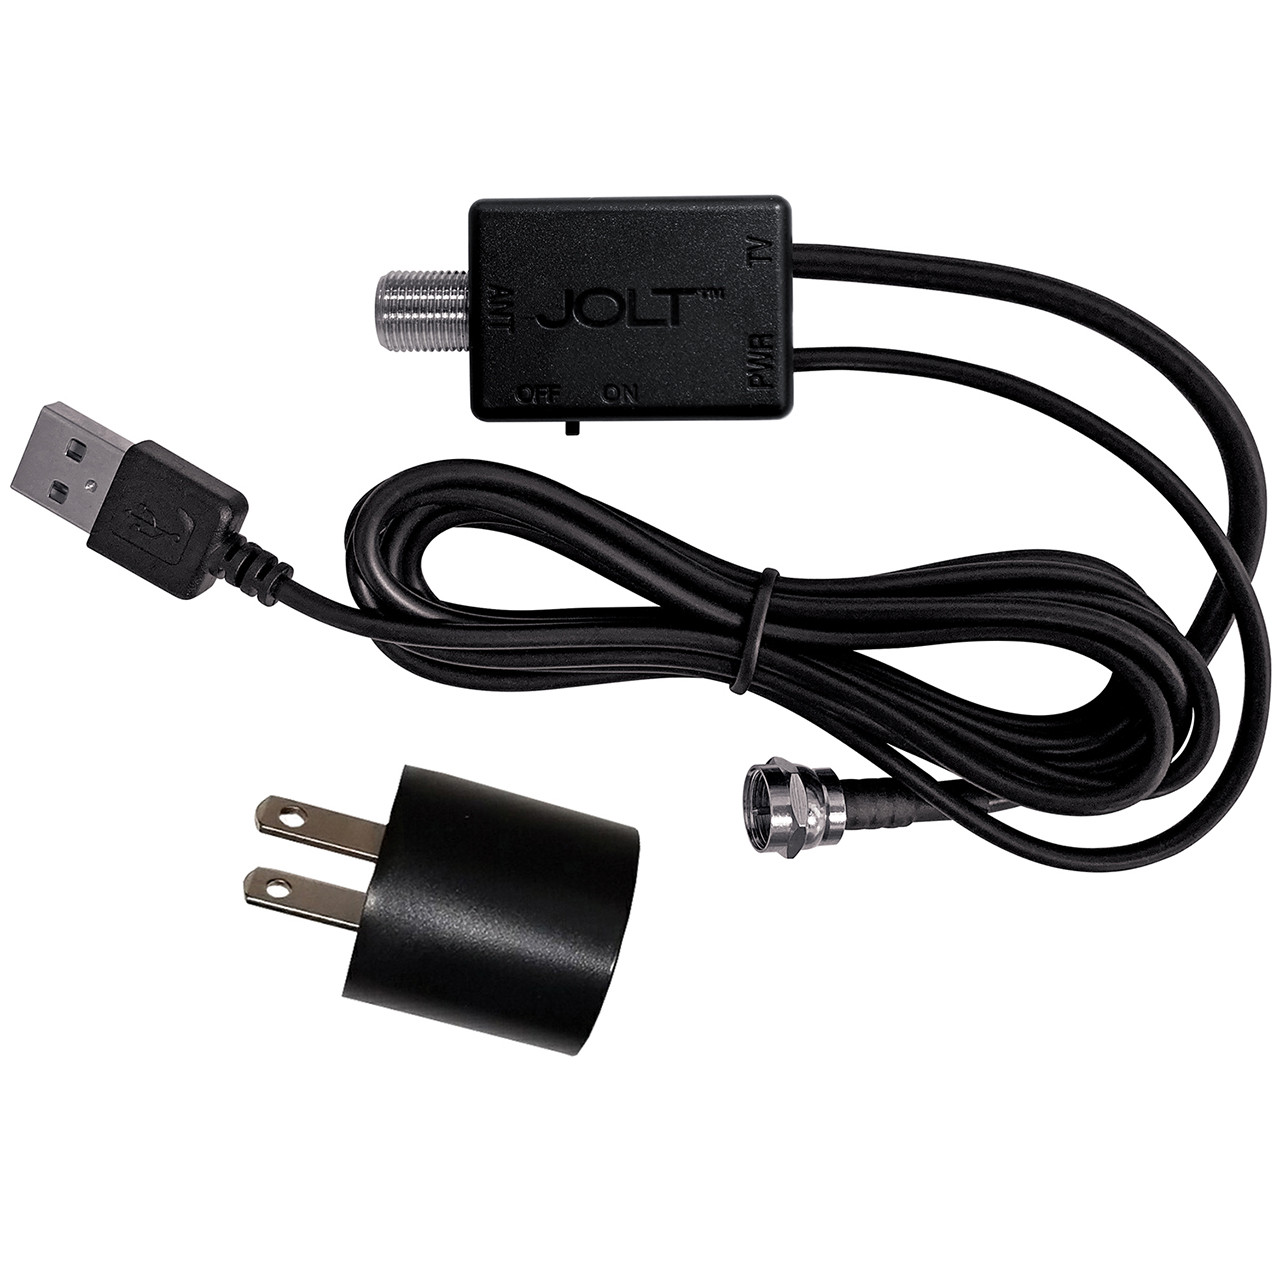 Jolt Switch In-Line Amplifier and Power Adapter